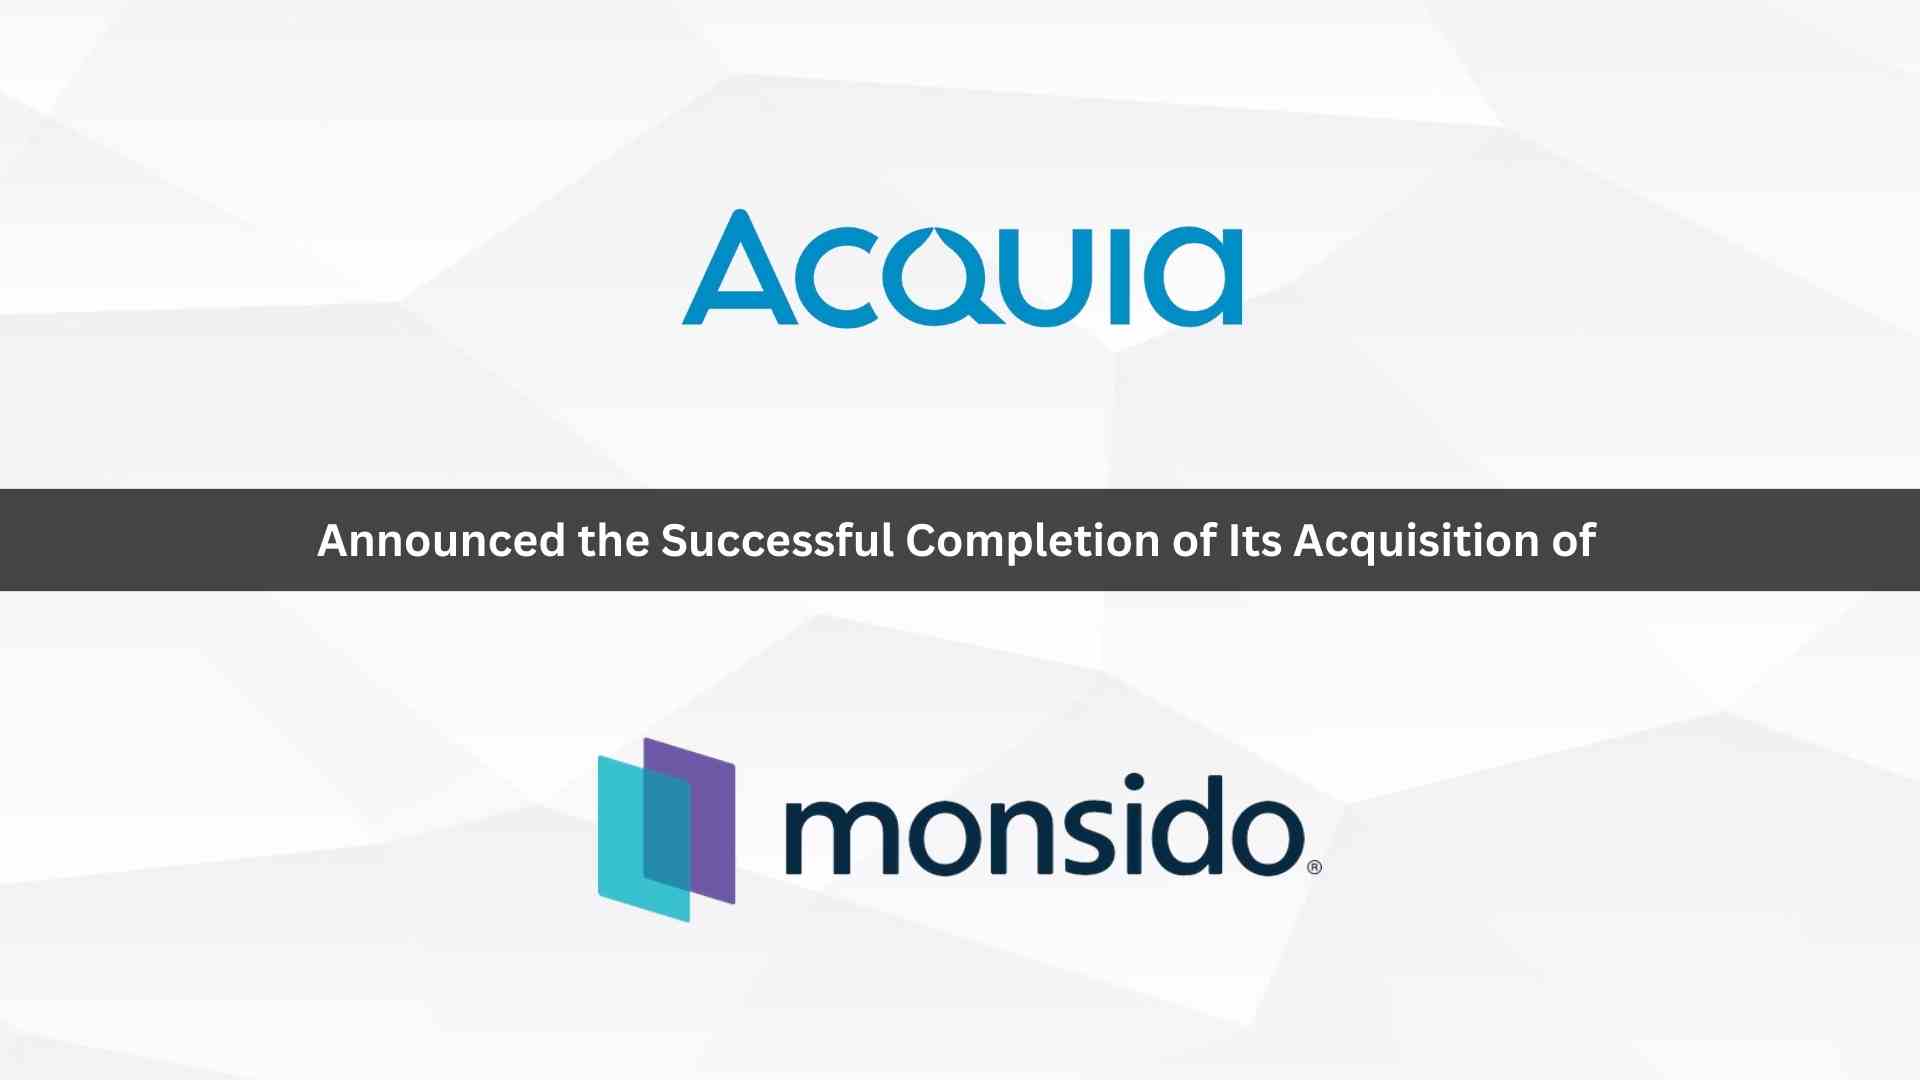 Acquia Completes Acquisition of Monsido